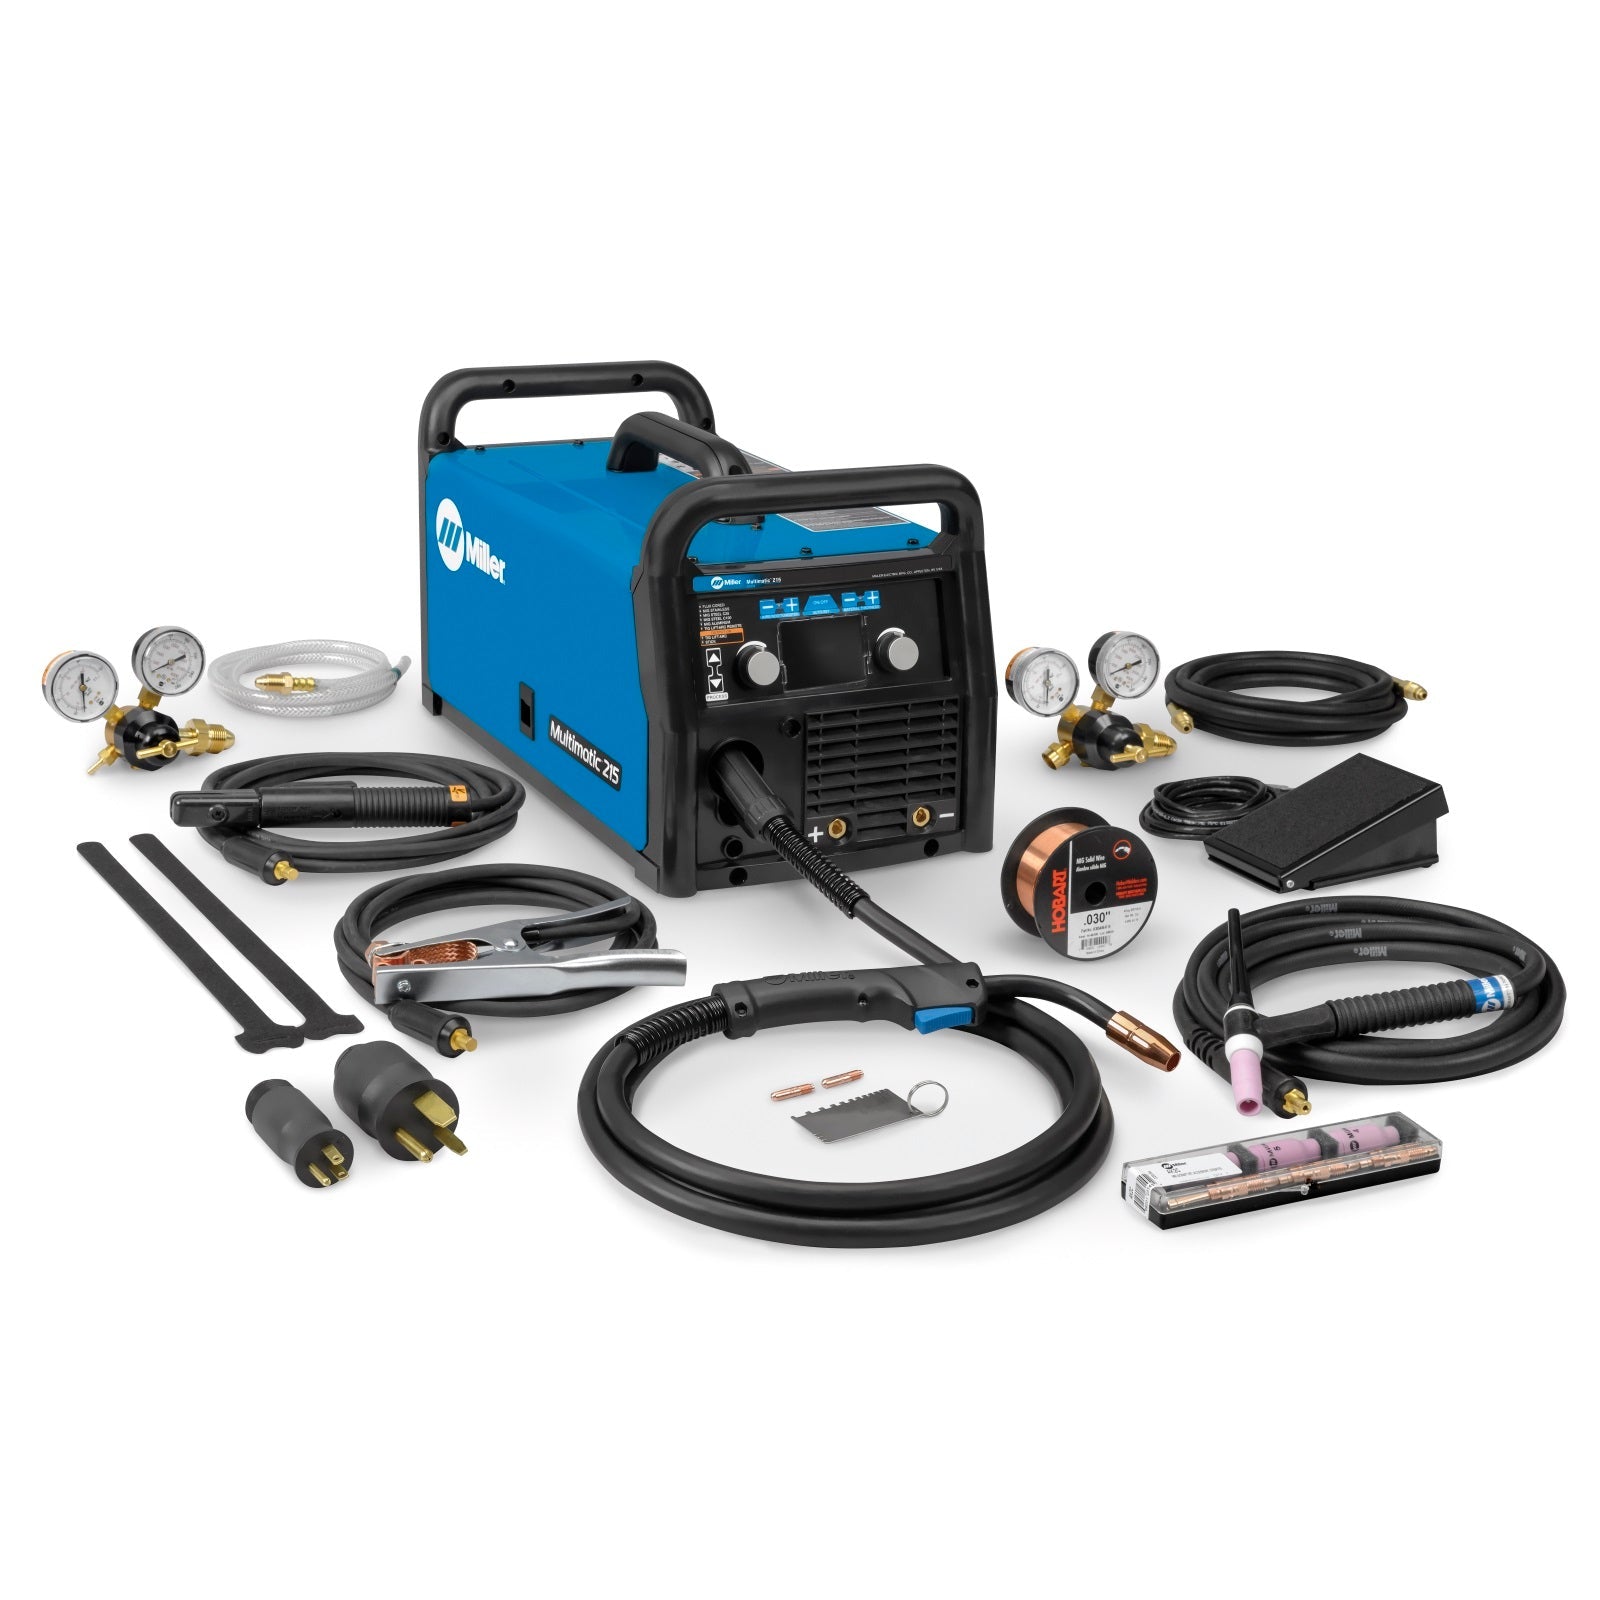 Miller Multimatic 215 Auto-Set Multiprocess Welder with TIG Package (951674)